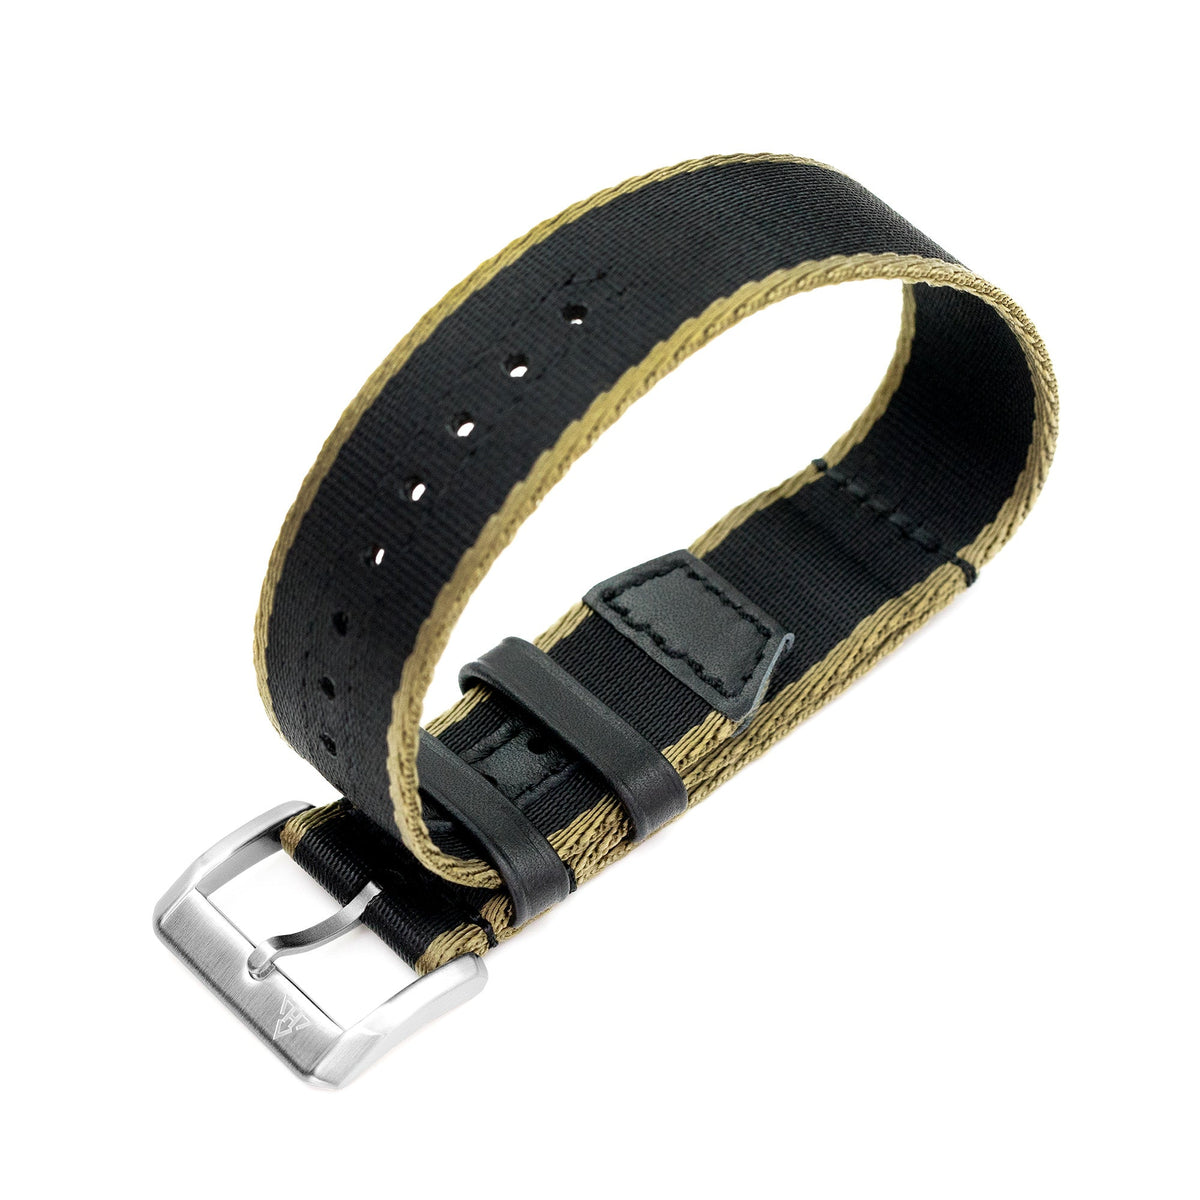 The Radiol-B Strap by HAVESTON Straps, 20mm or 22mm Strapcode Watch Bands